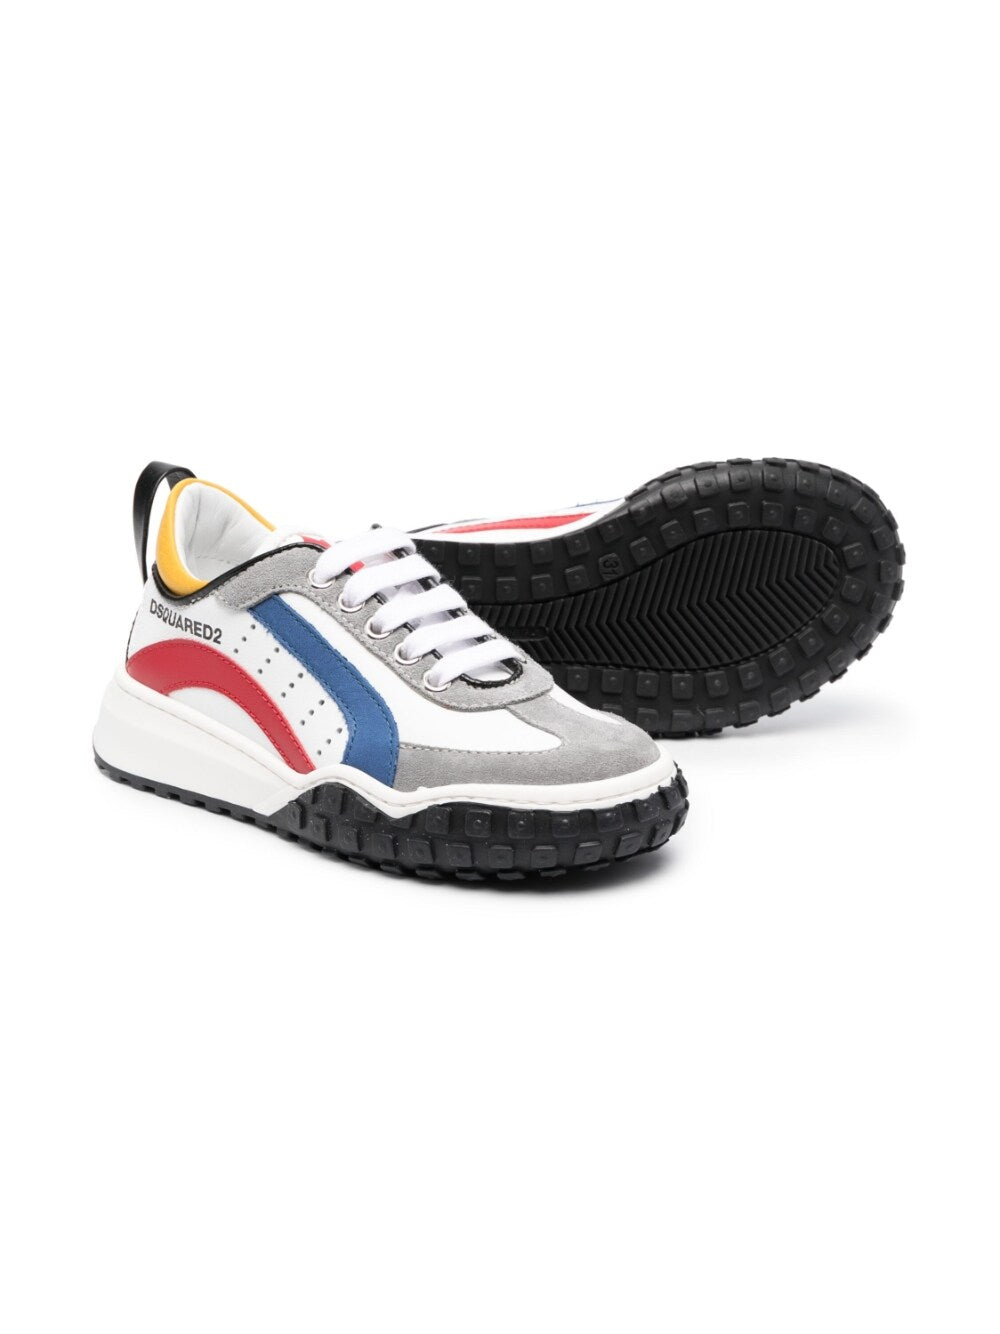 White and multicolored sneakers for children